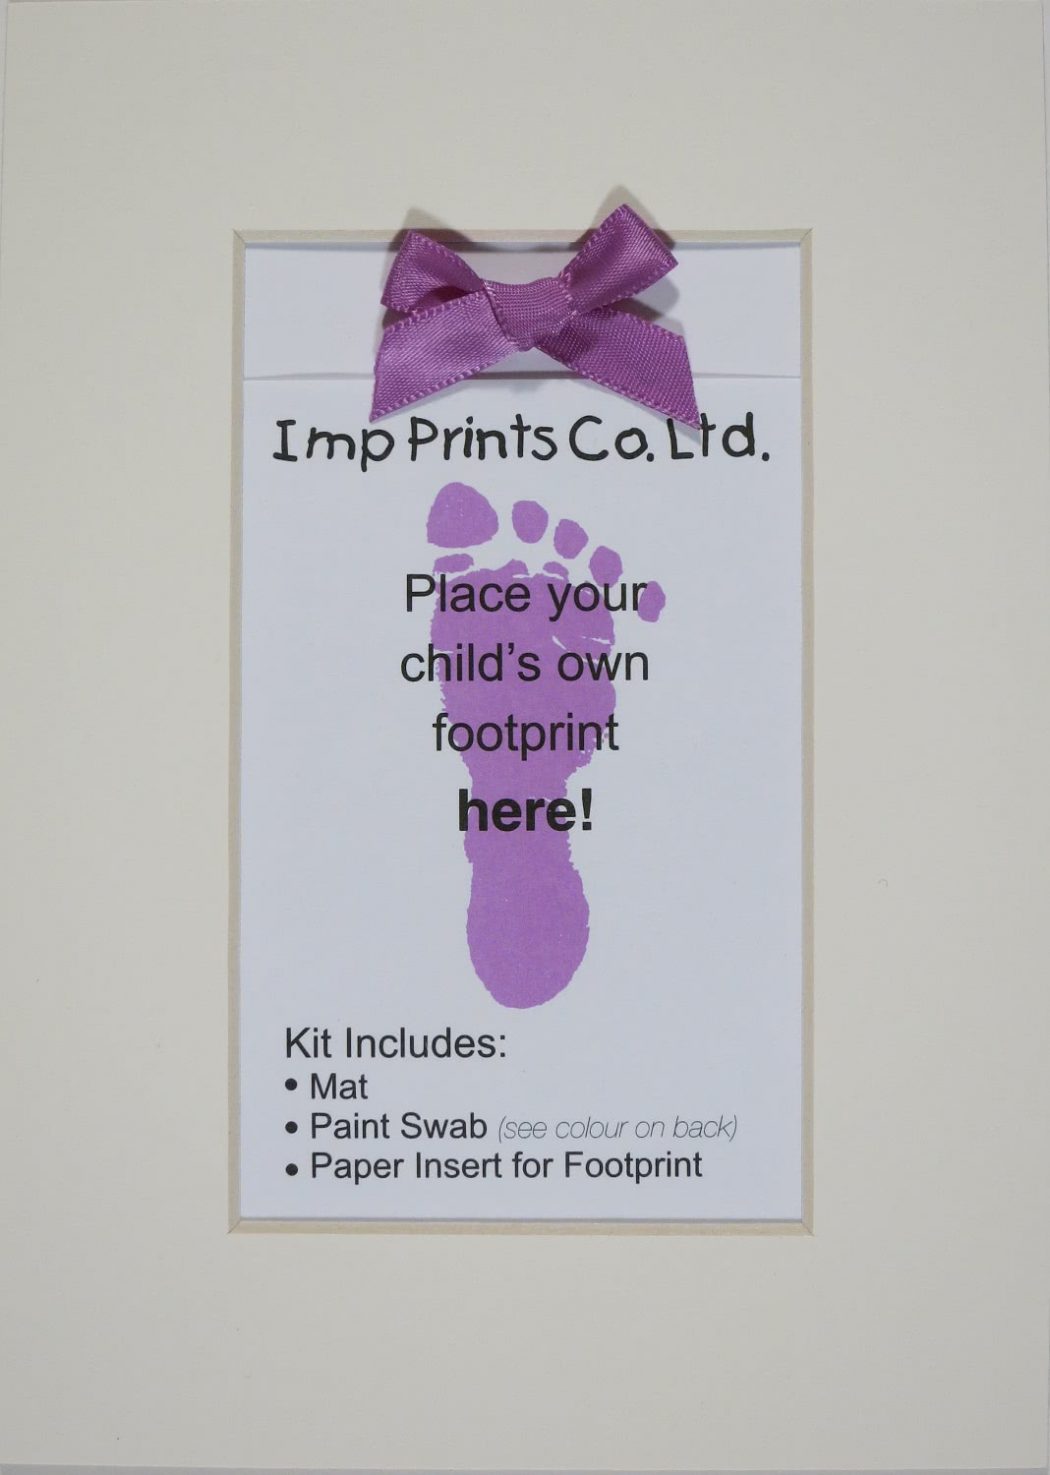 Imp Prints Co keepsakes for parents Plain Ivory Mat with a purple bow on the paper near the top. An insert with an image of a purple footprint says "Place your child's own footprint here, kit includes Mat, Paint Swab, Paper